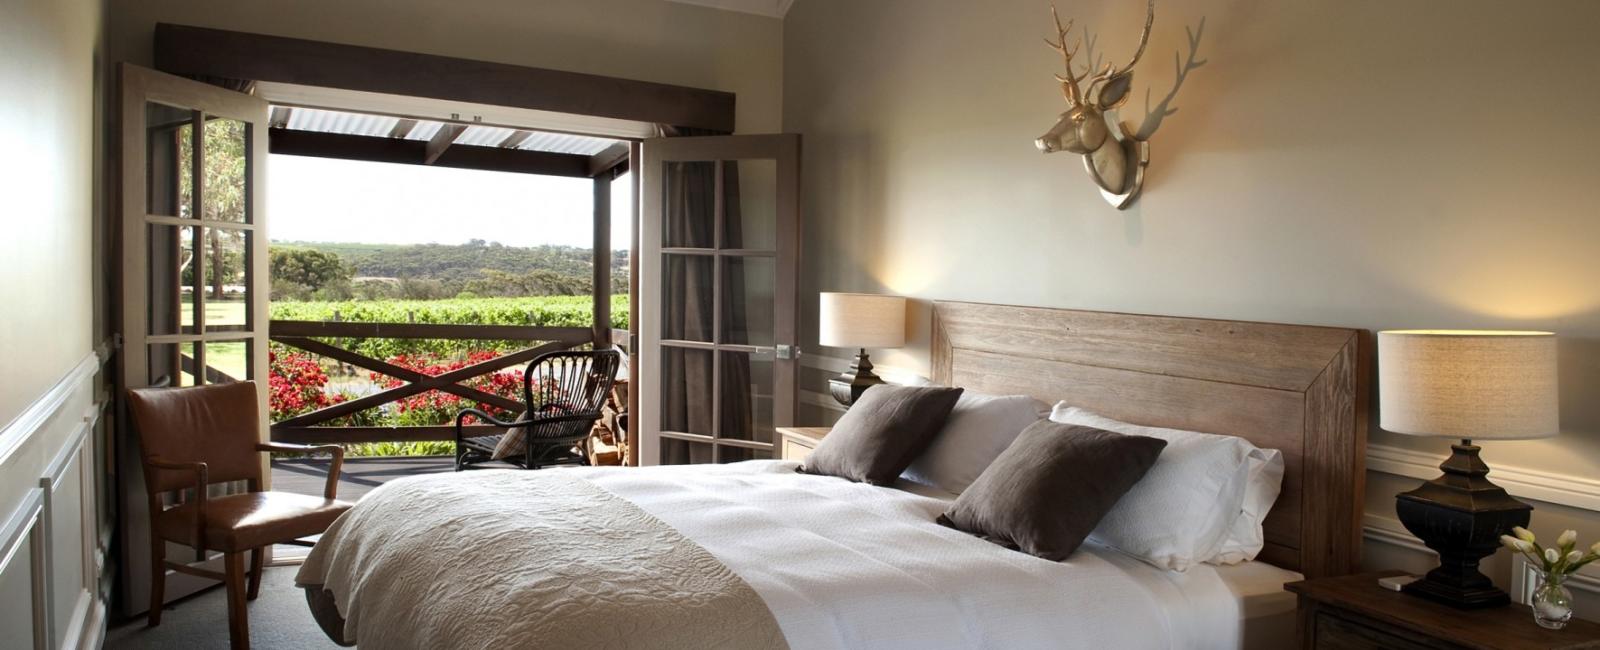 Boutique bed and breakfast accommodation